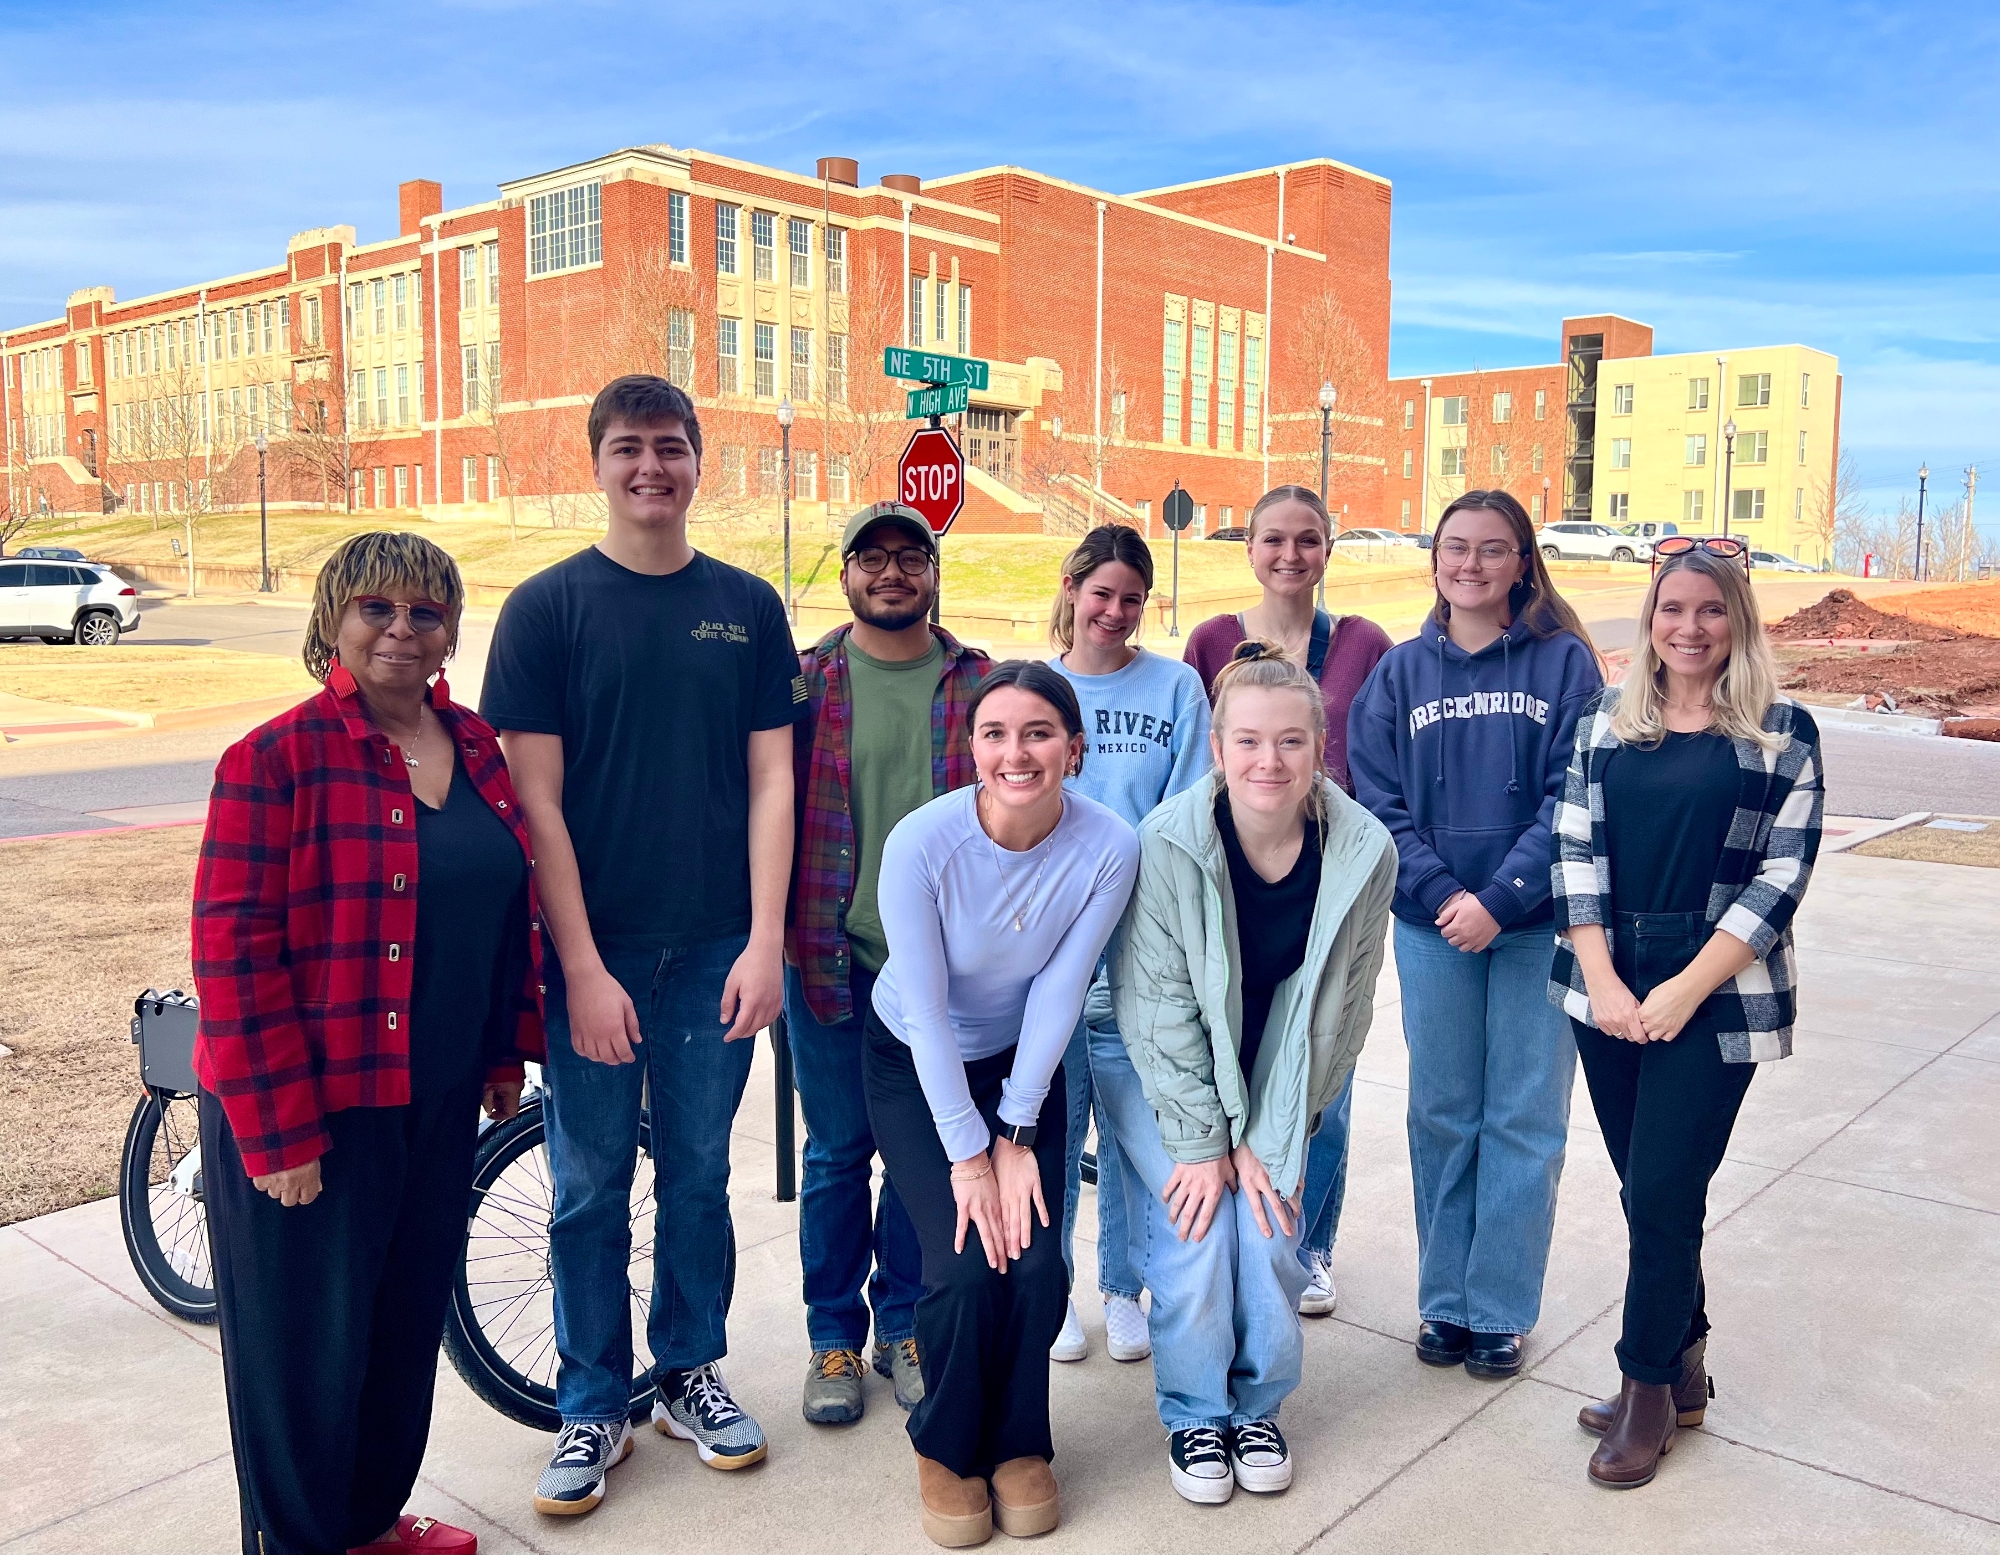 Capstone students pose for a photo during a site visit to the JFK neighborhood in Oklahoma City.